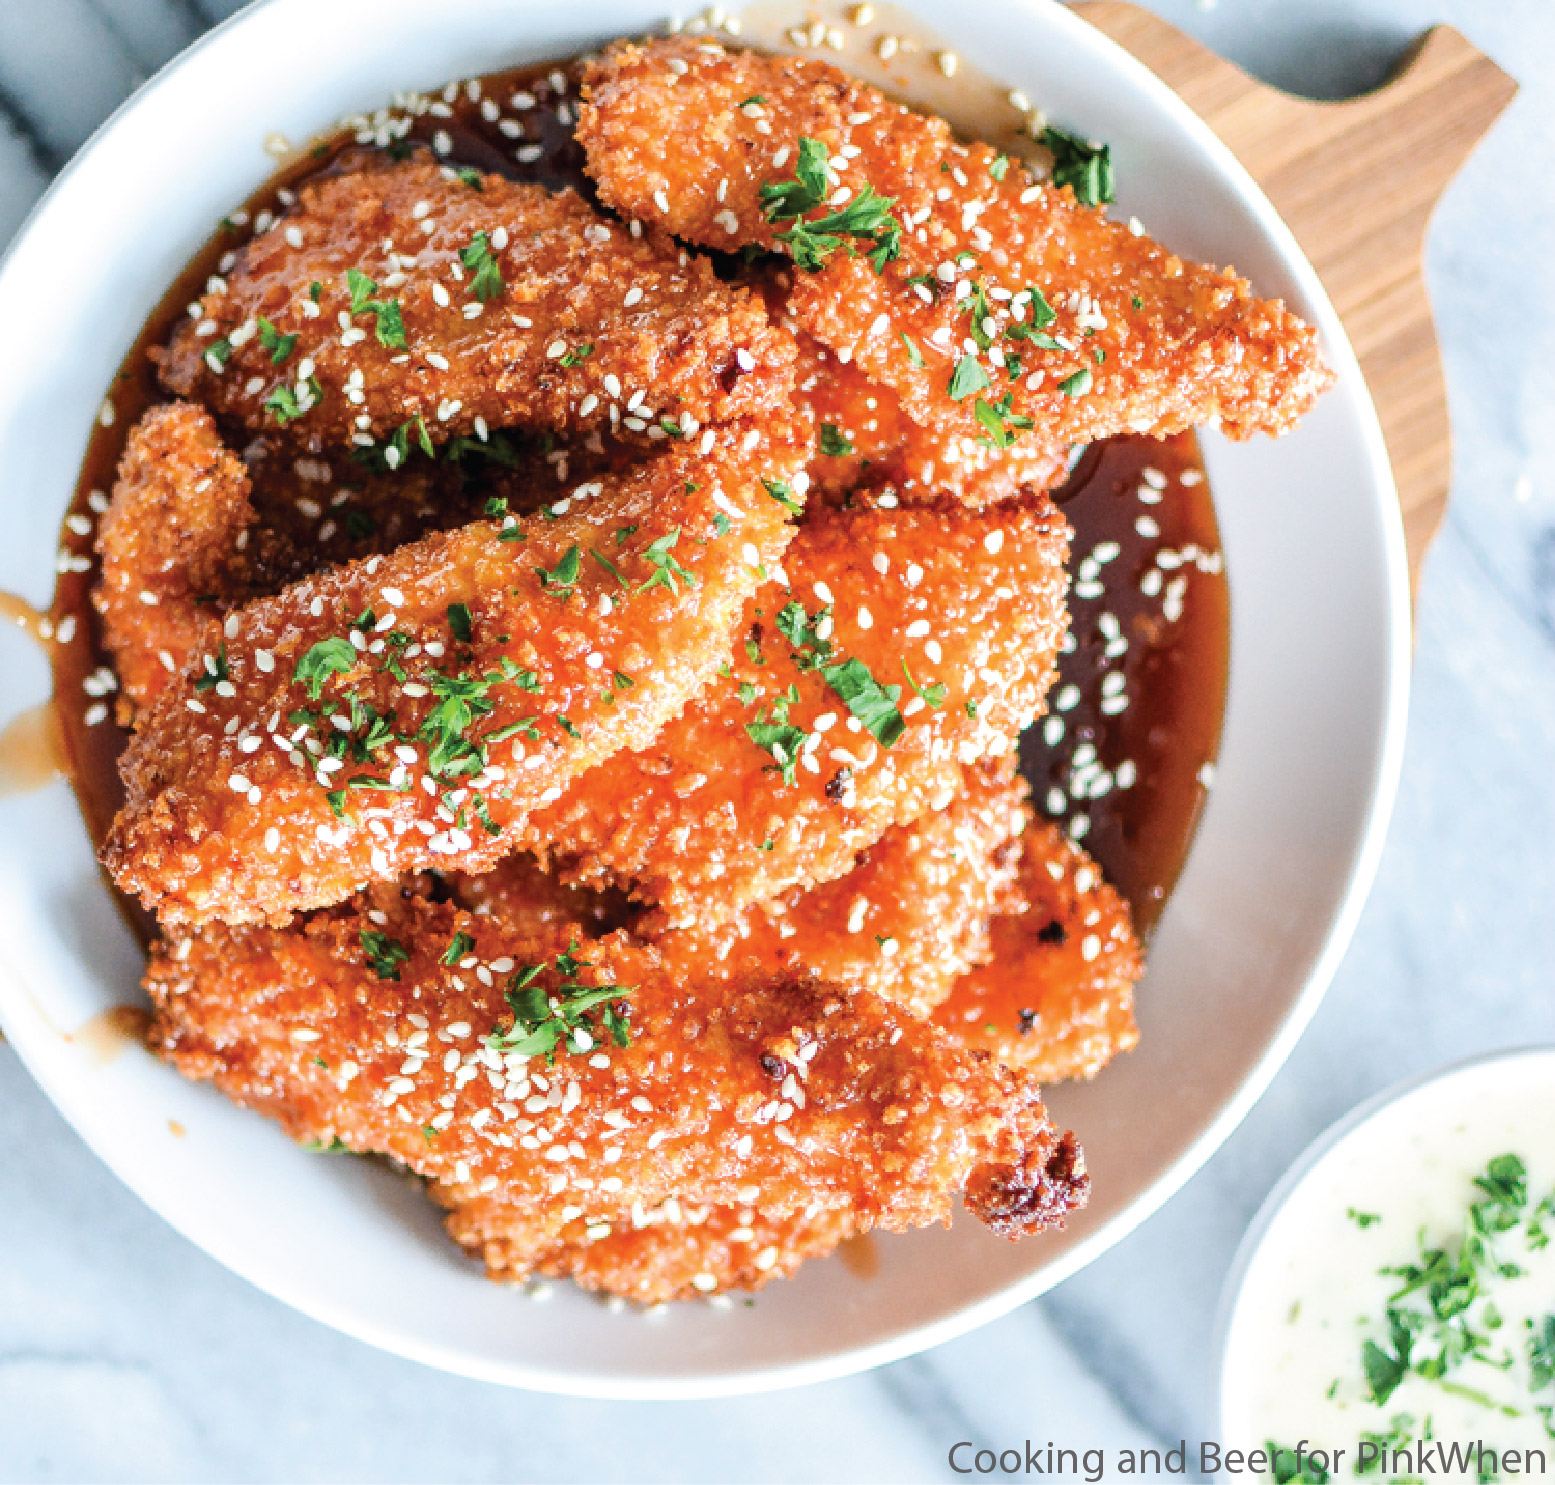 Sweet and Sticky Chicken Strips are a simple, quick and delicious dinner or lunch recipe! | www.cookingandbeer.com